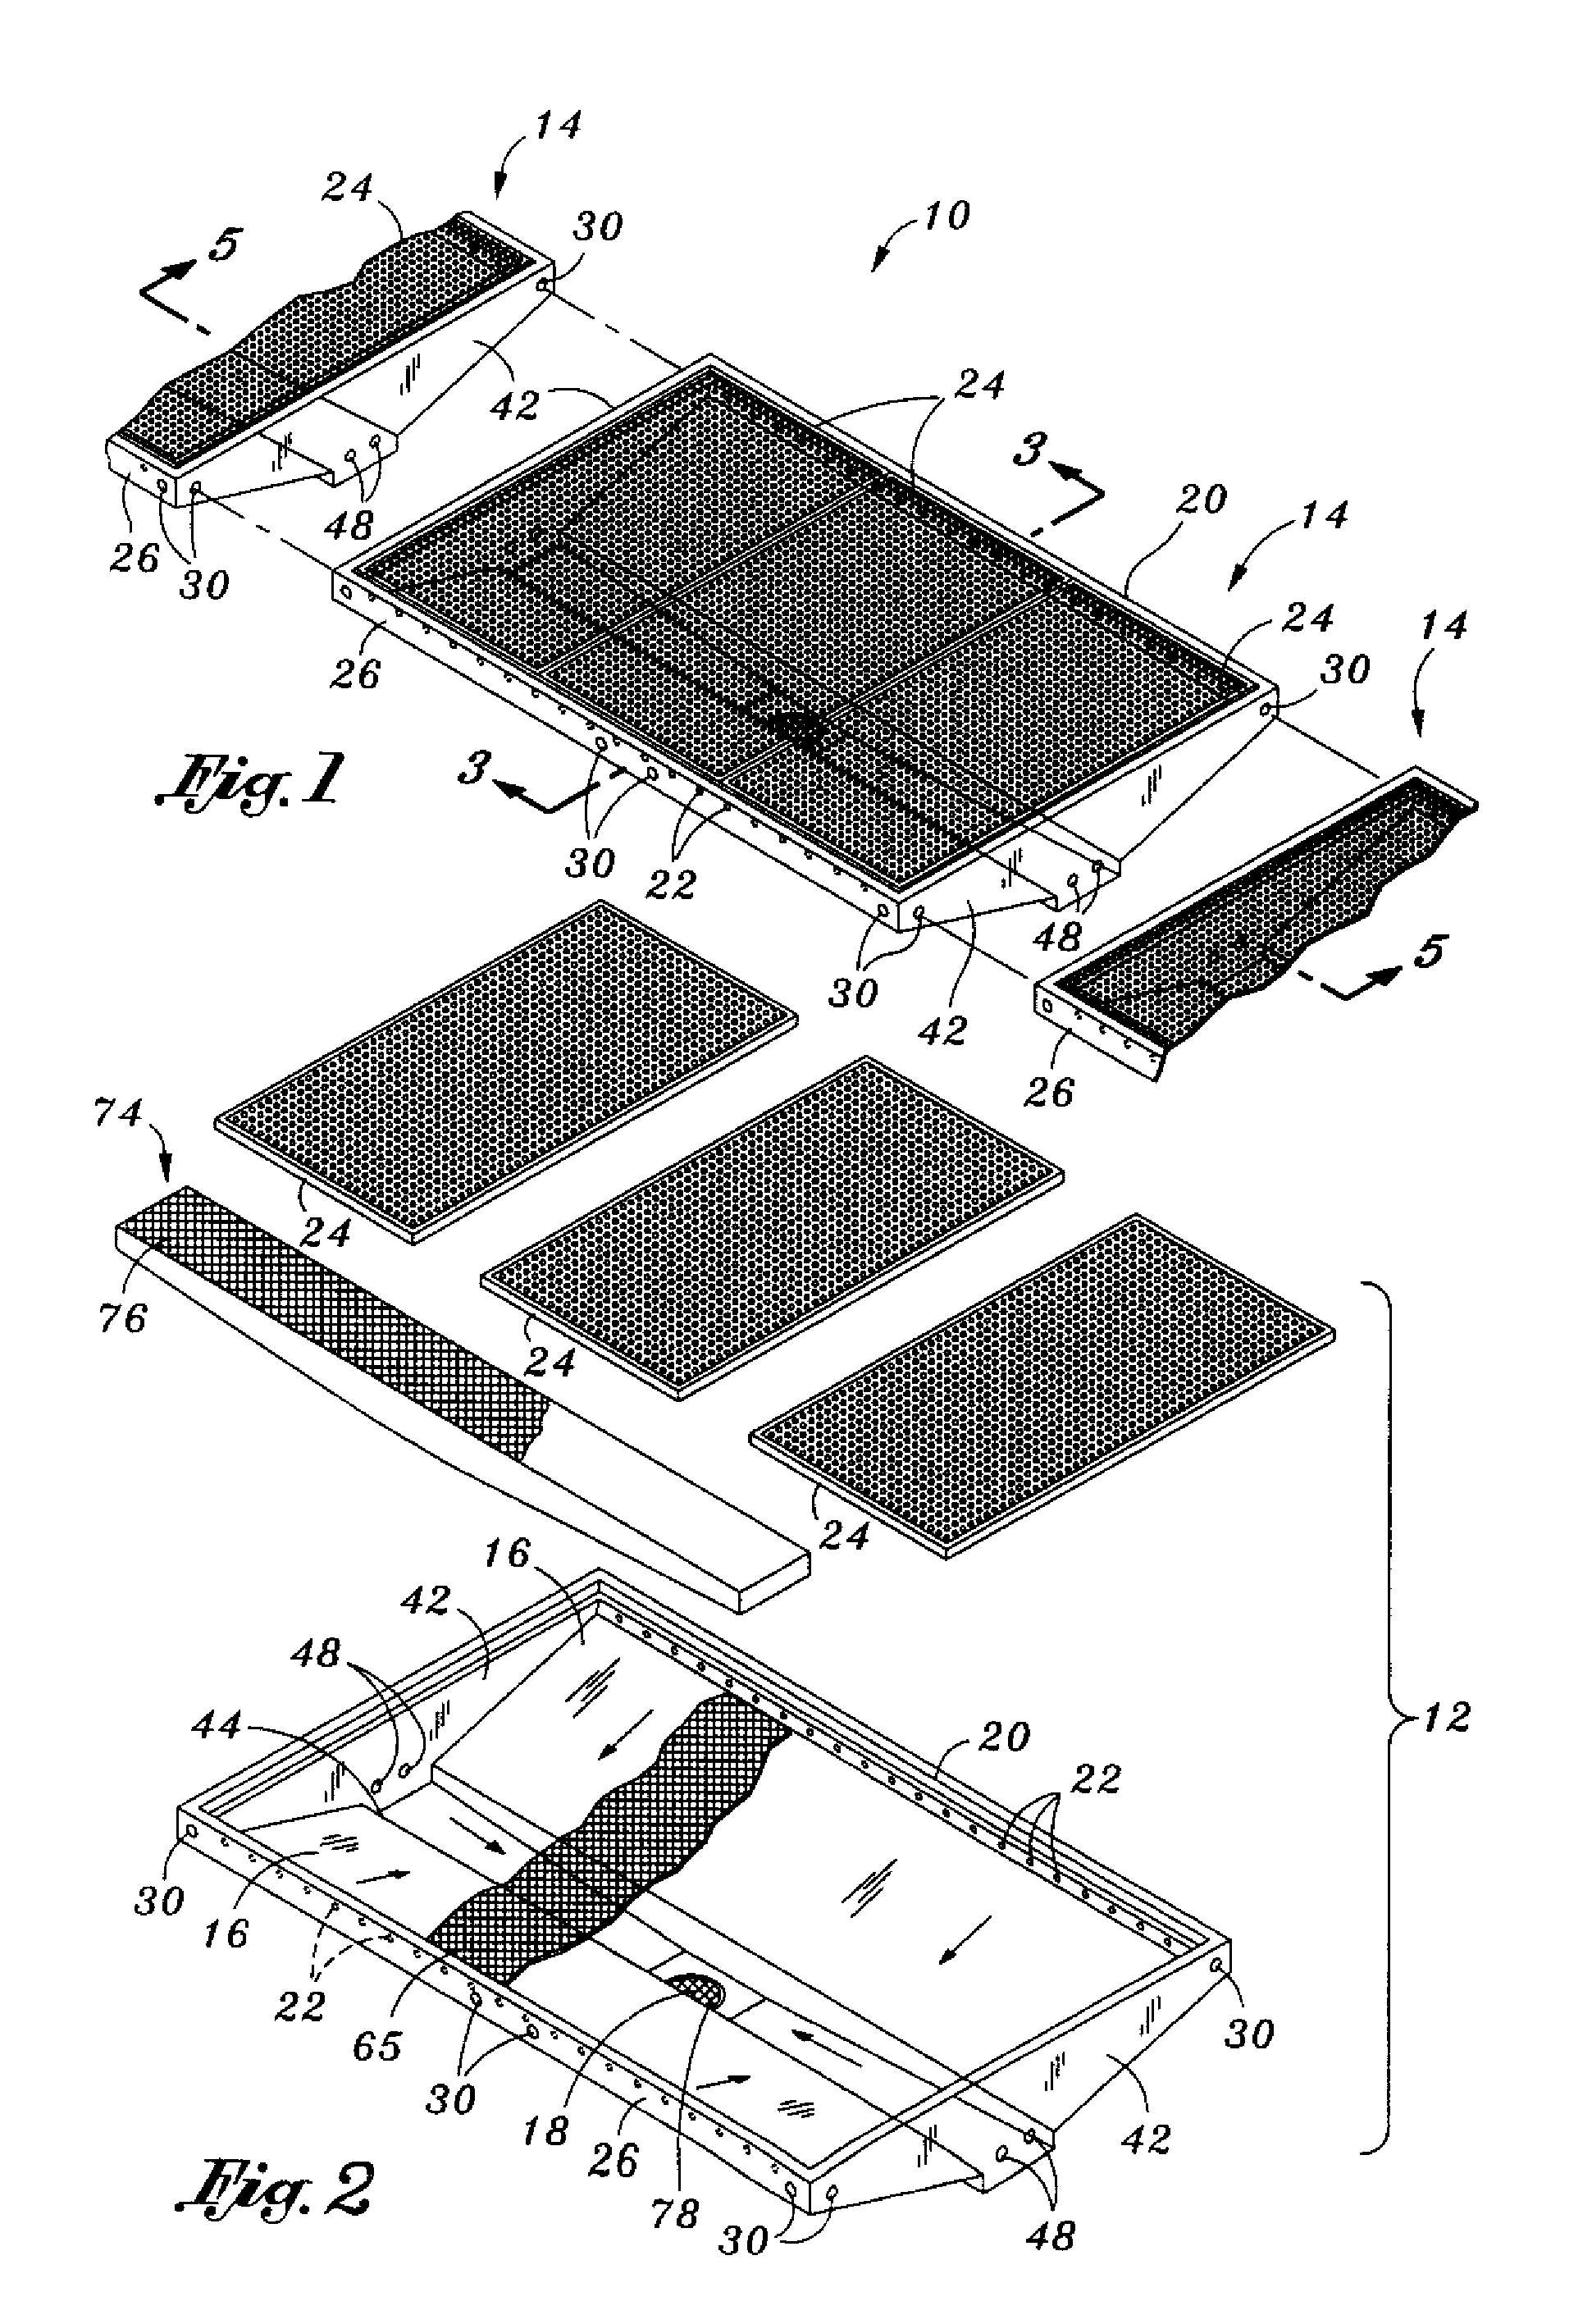 Self-cleaning flooring system